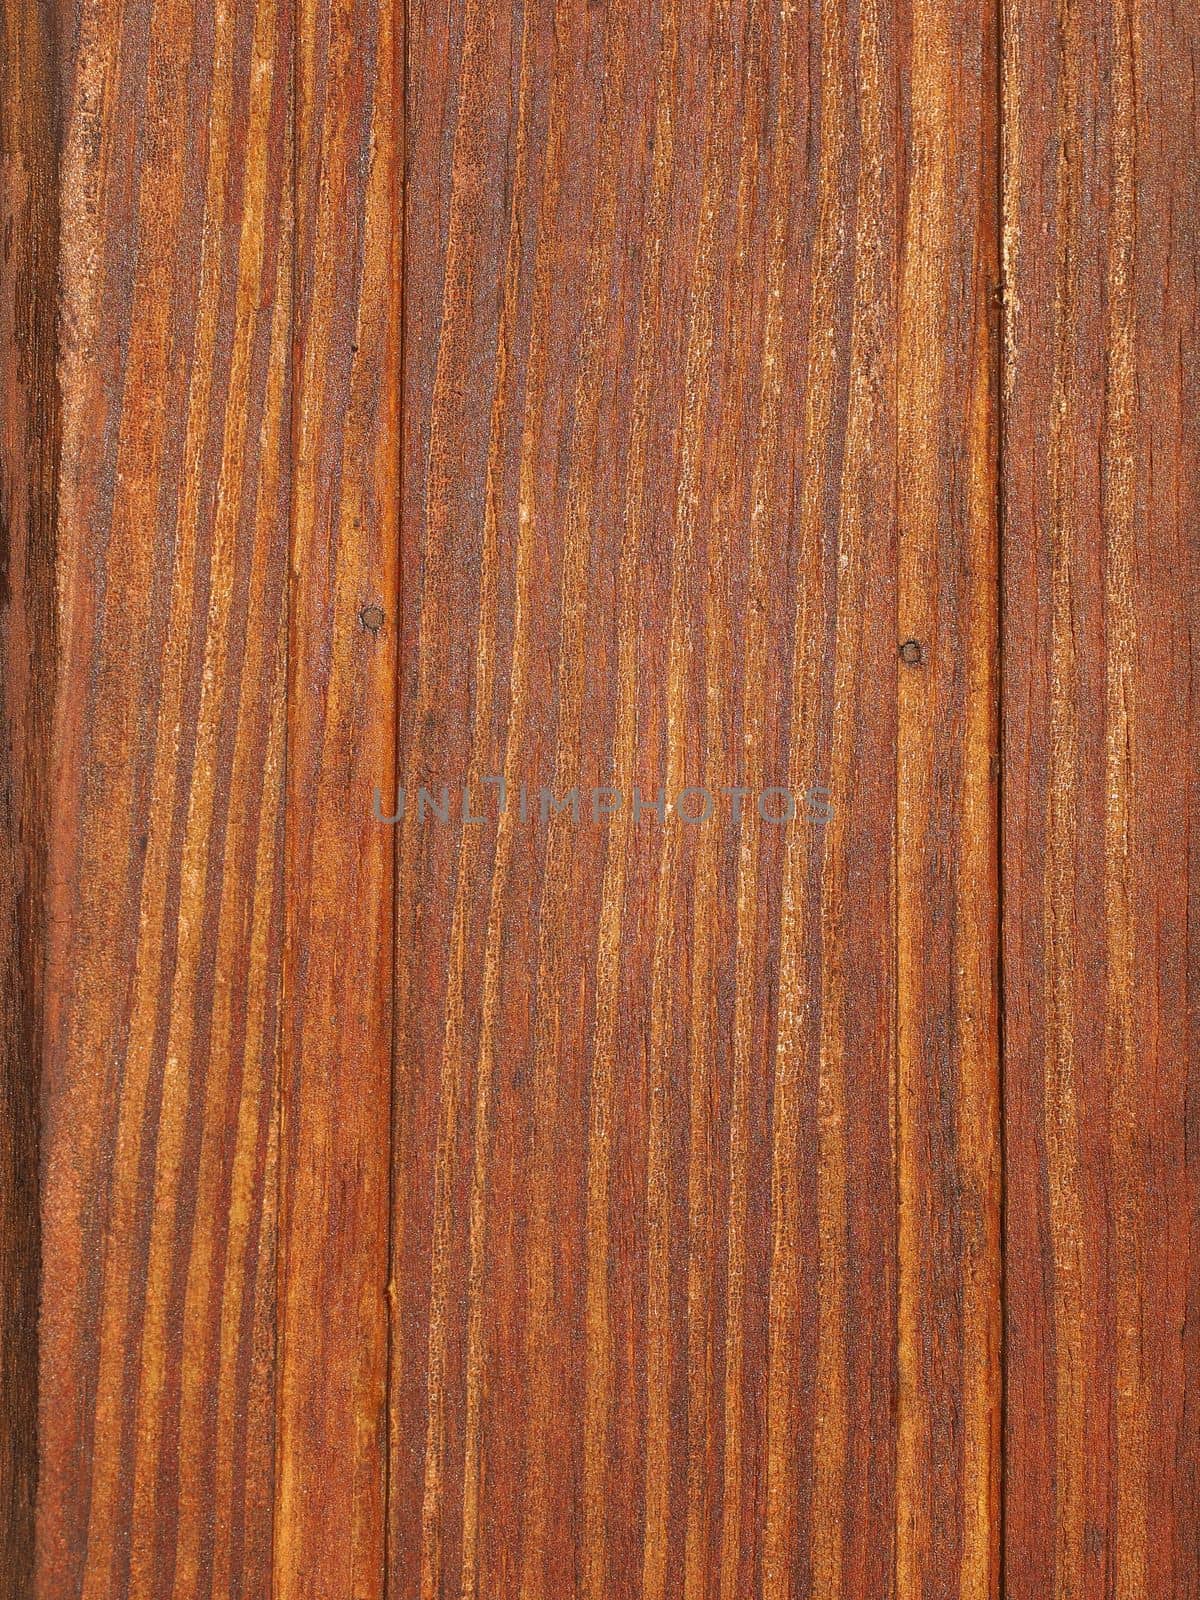 brown wood texture useful as a background